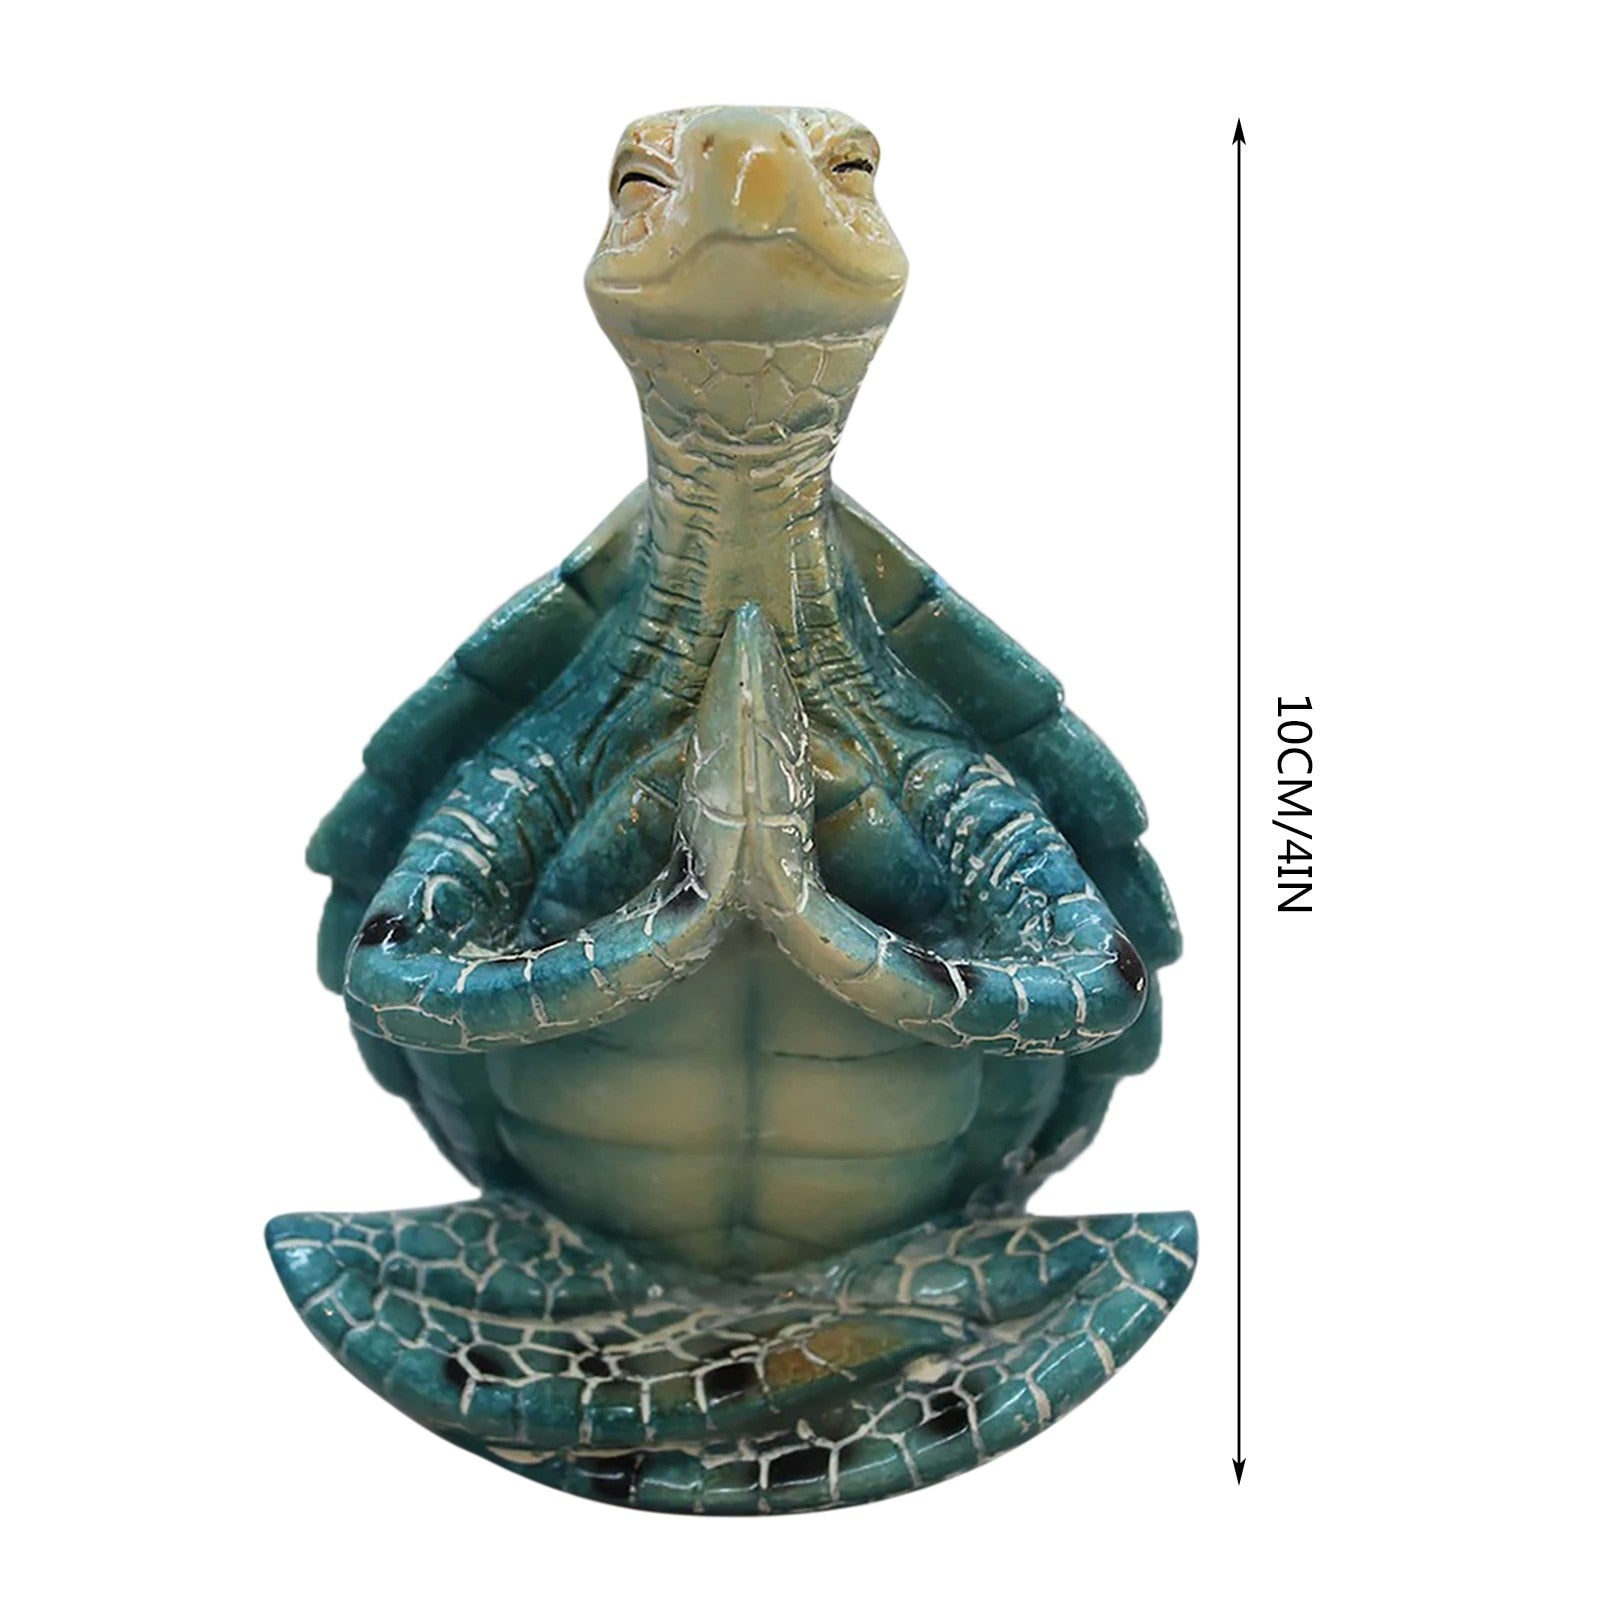 Yoga Turtle Ornament Perfect Yoga Exercise Gift - Personal Hour for Yoga and Meditations 